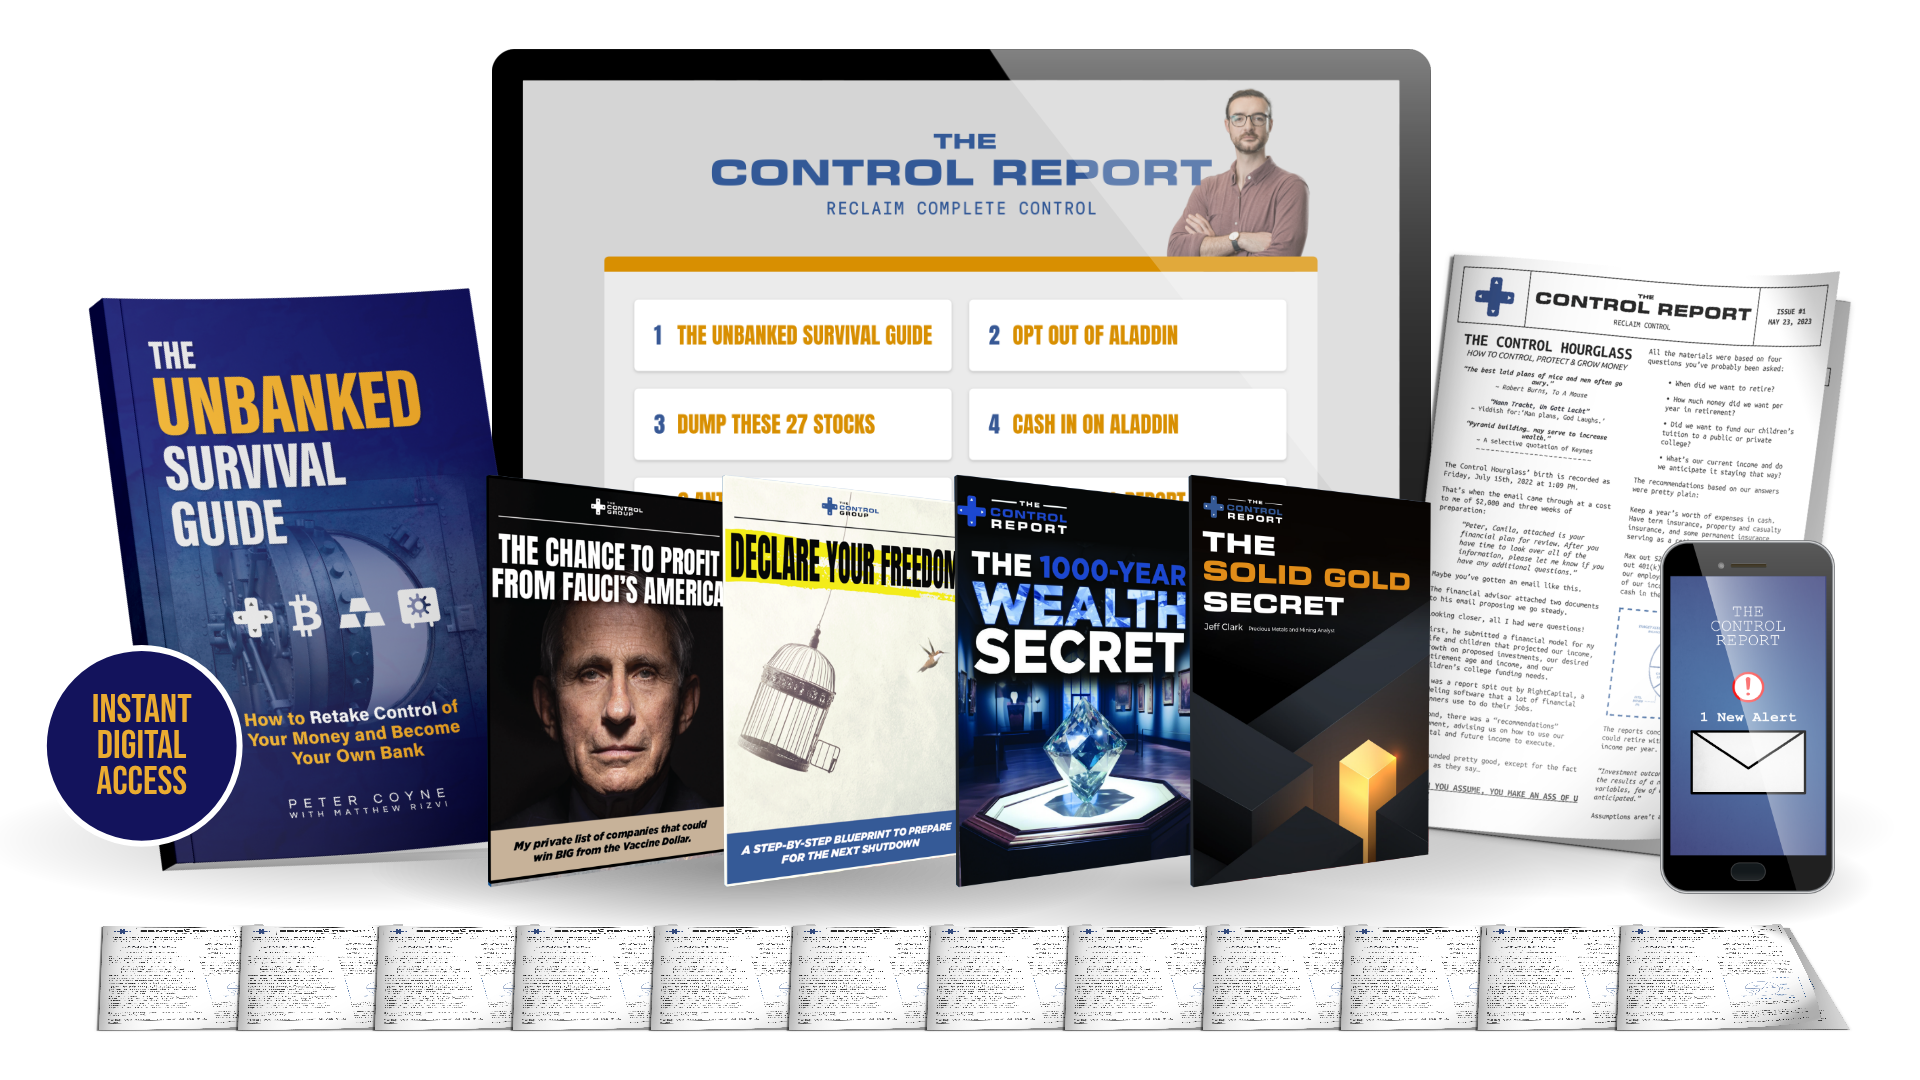 The Control Report